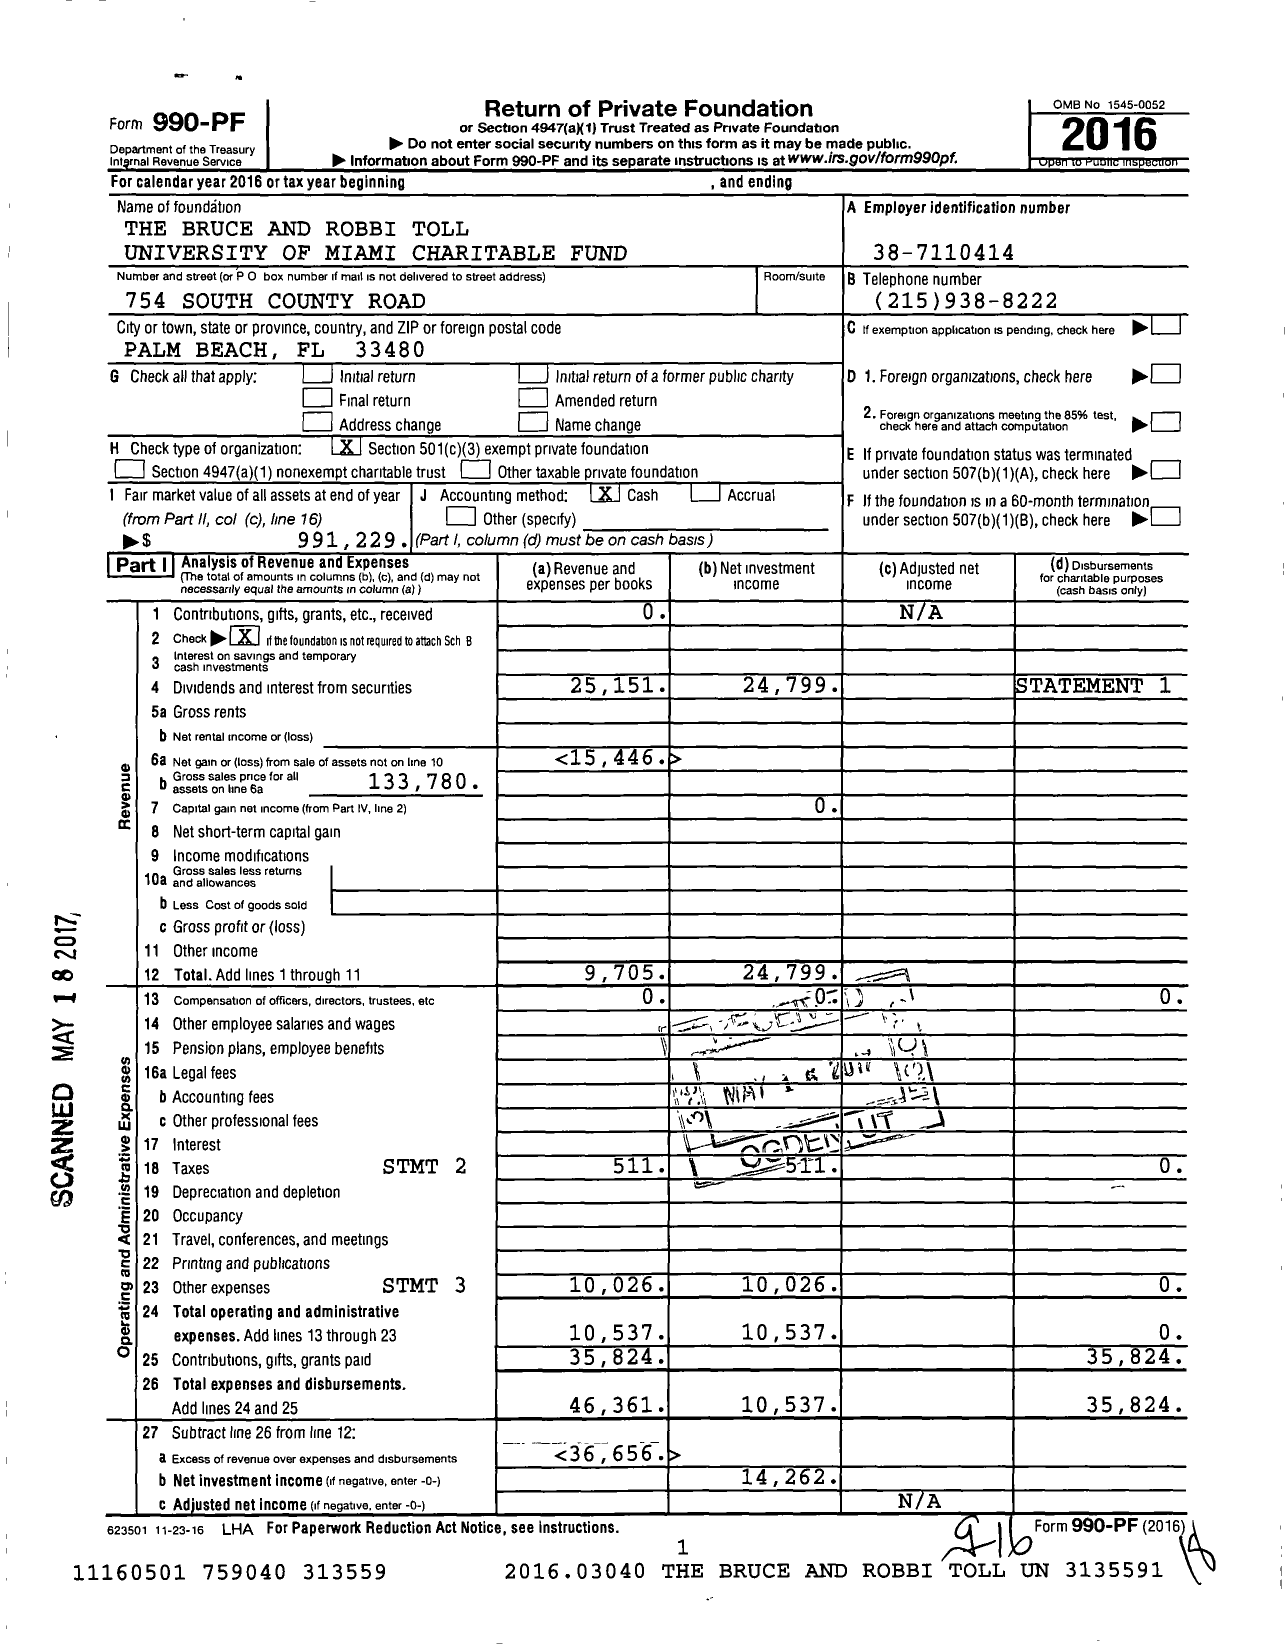 Image of first page of 2016 Form 990PF for The Bruce and Robbi Toll University of Miami Charitable Fund